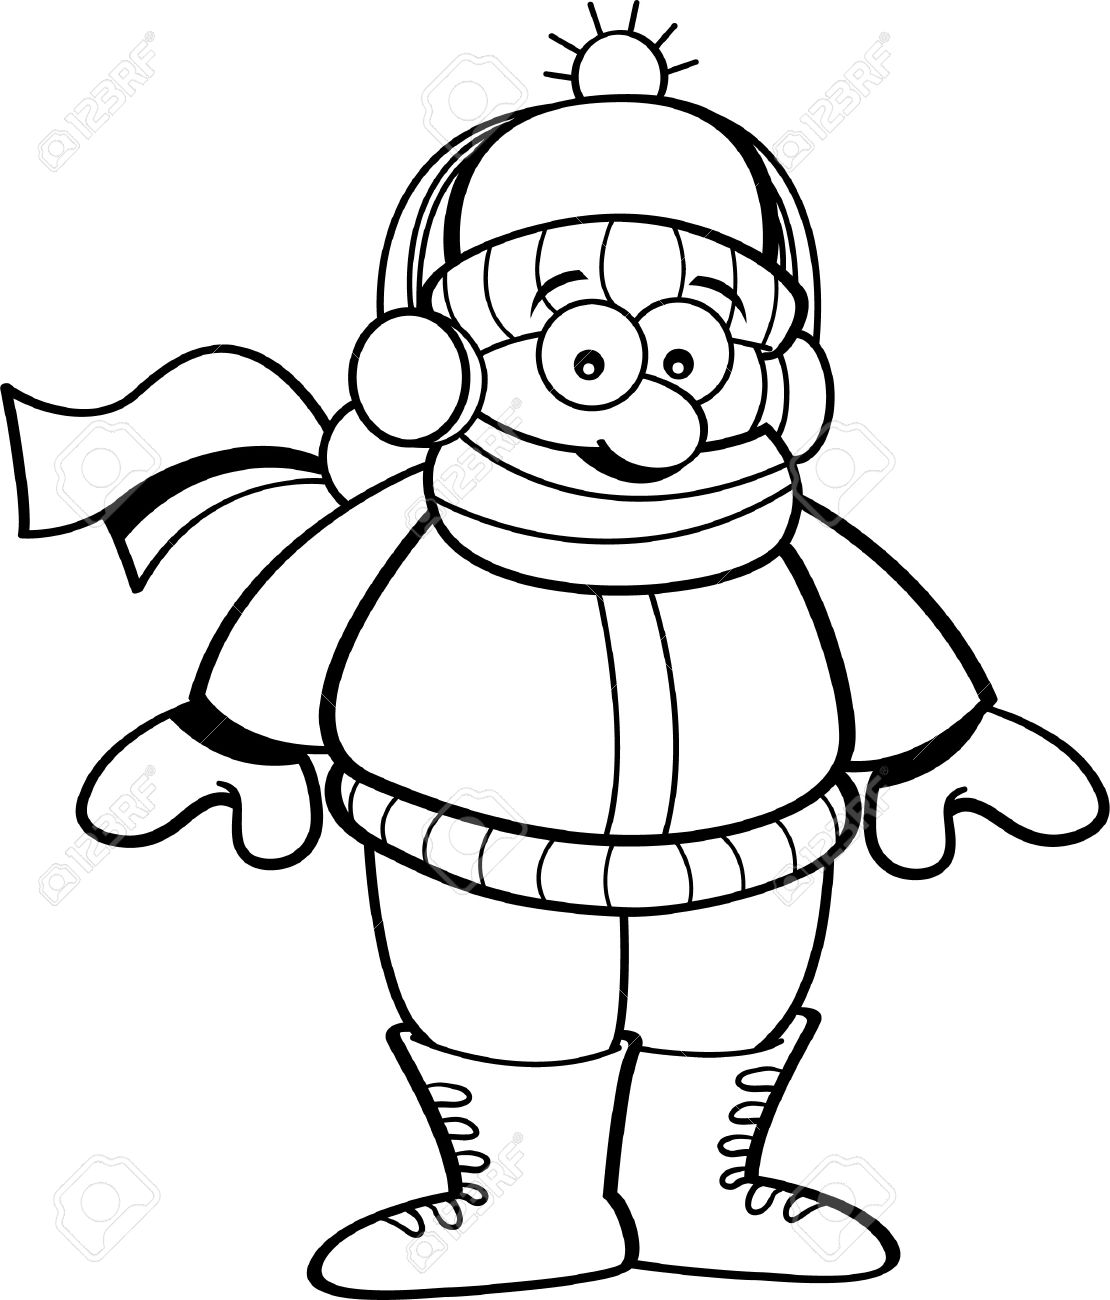 Black And White Illustration Of A Kid Wearing Winter Clothing.